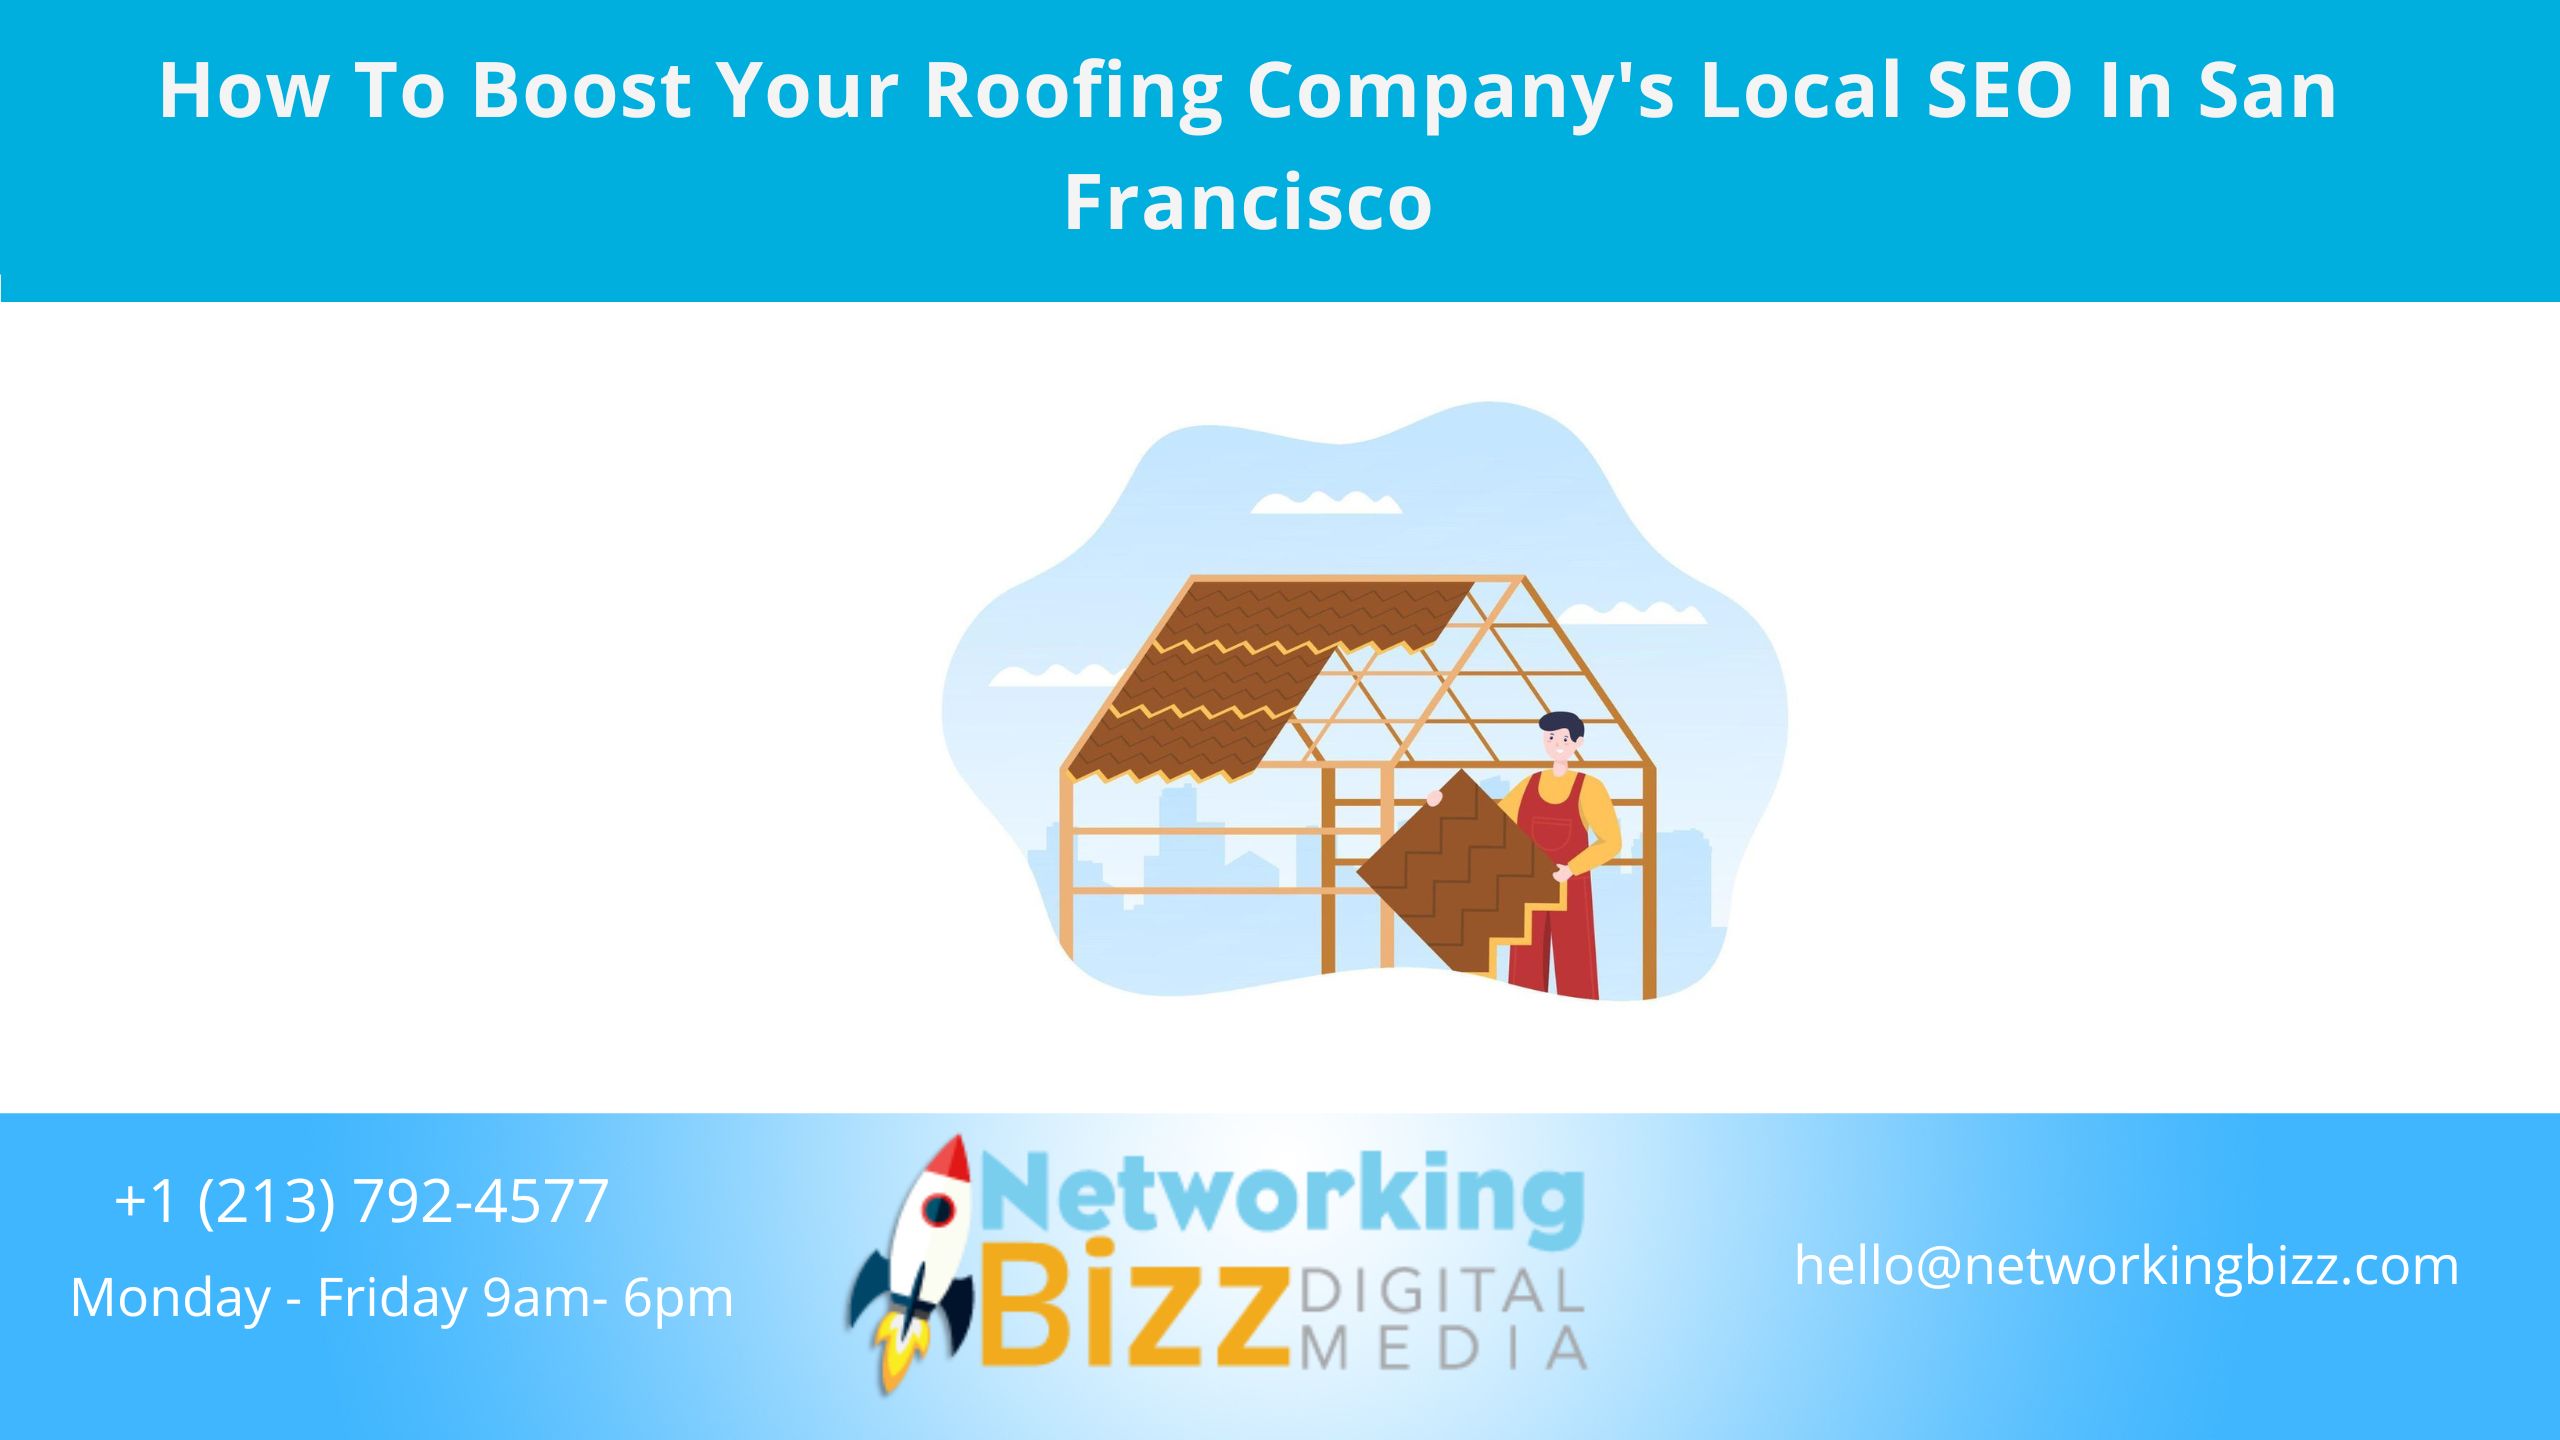 How To Boost Your Roofing Company’s Local SEO In San Francisco